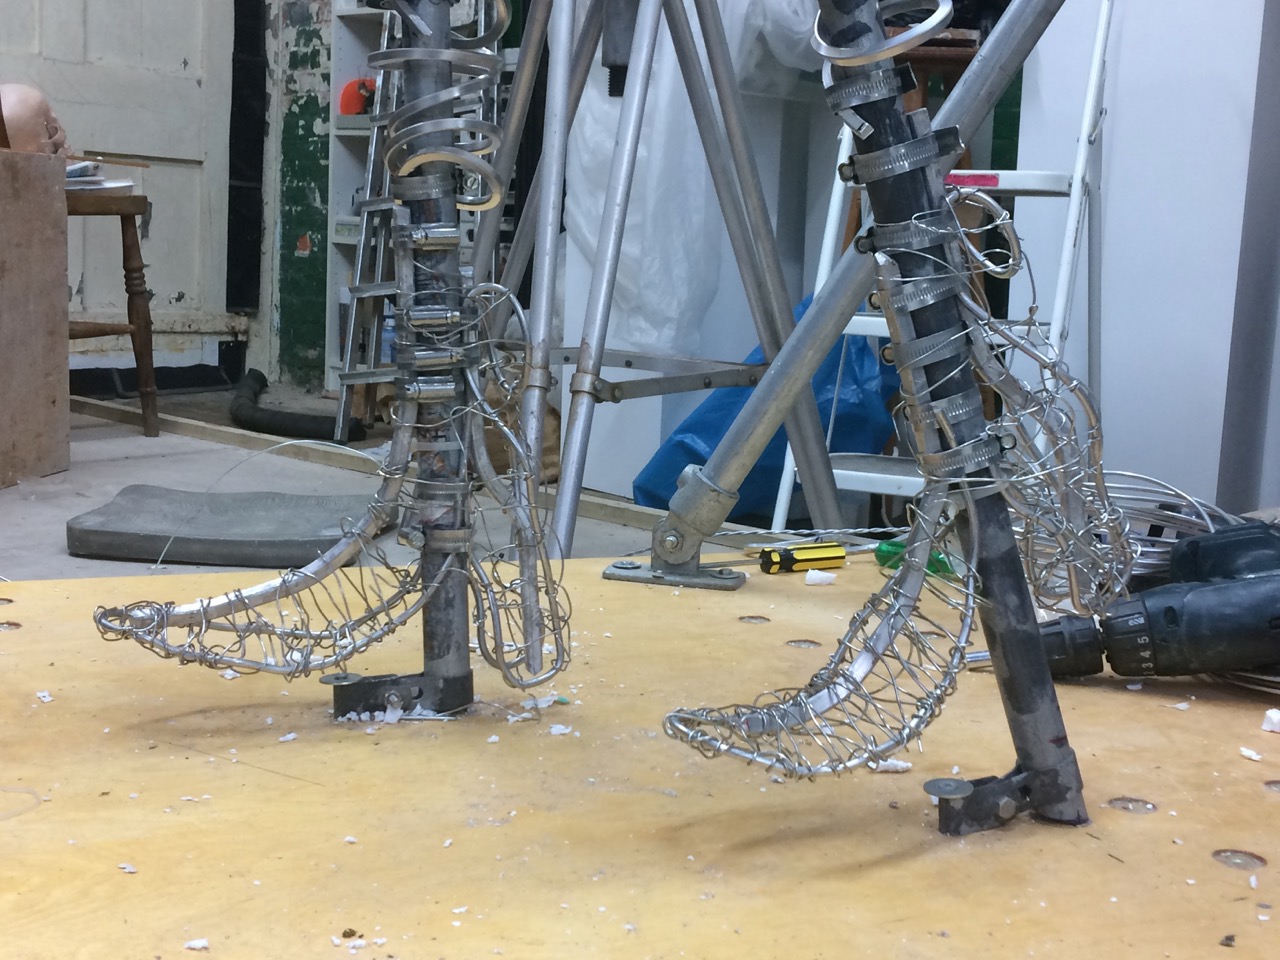 Our Emmelines feet armature - sculpture and photo by Hazel Reeves